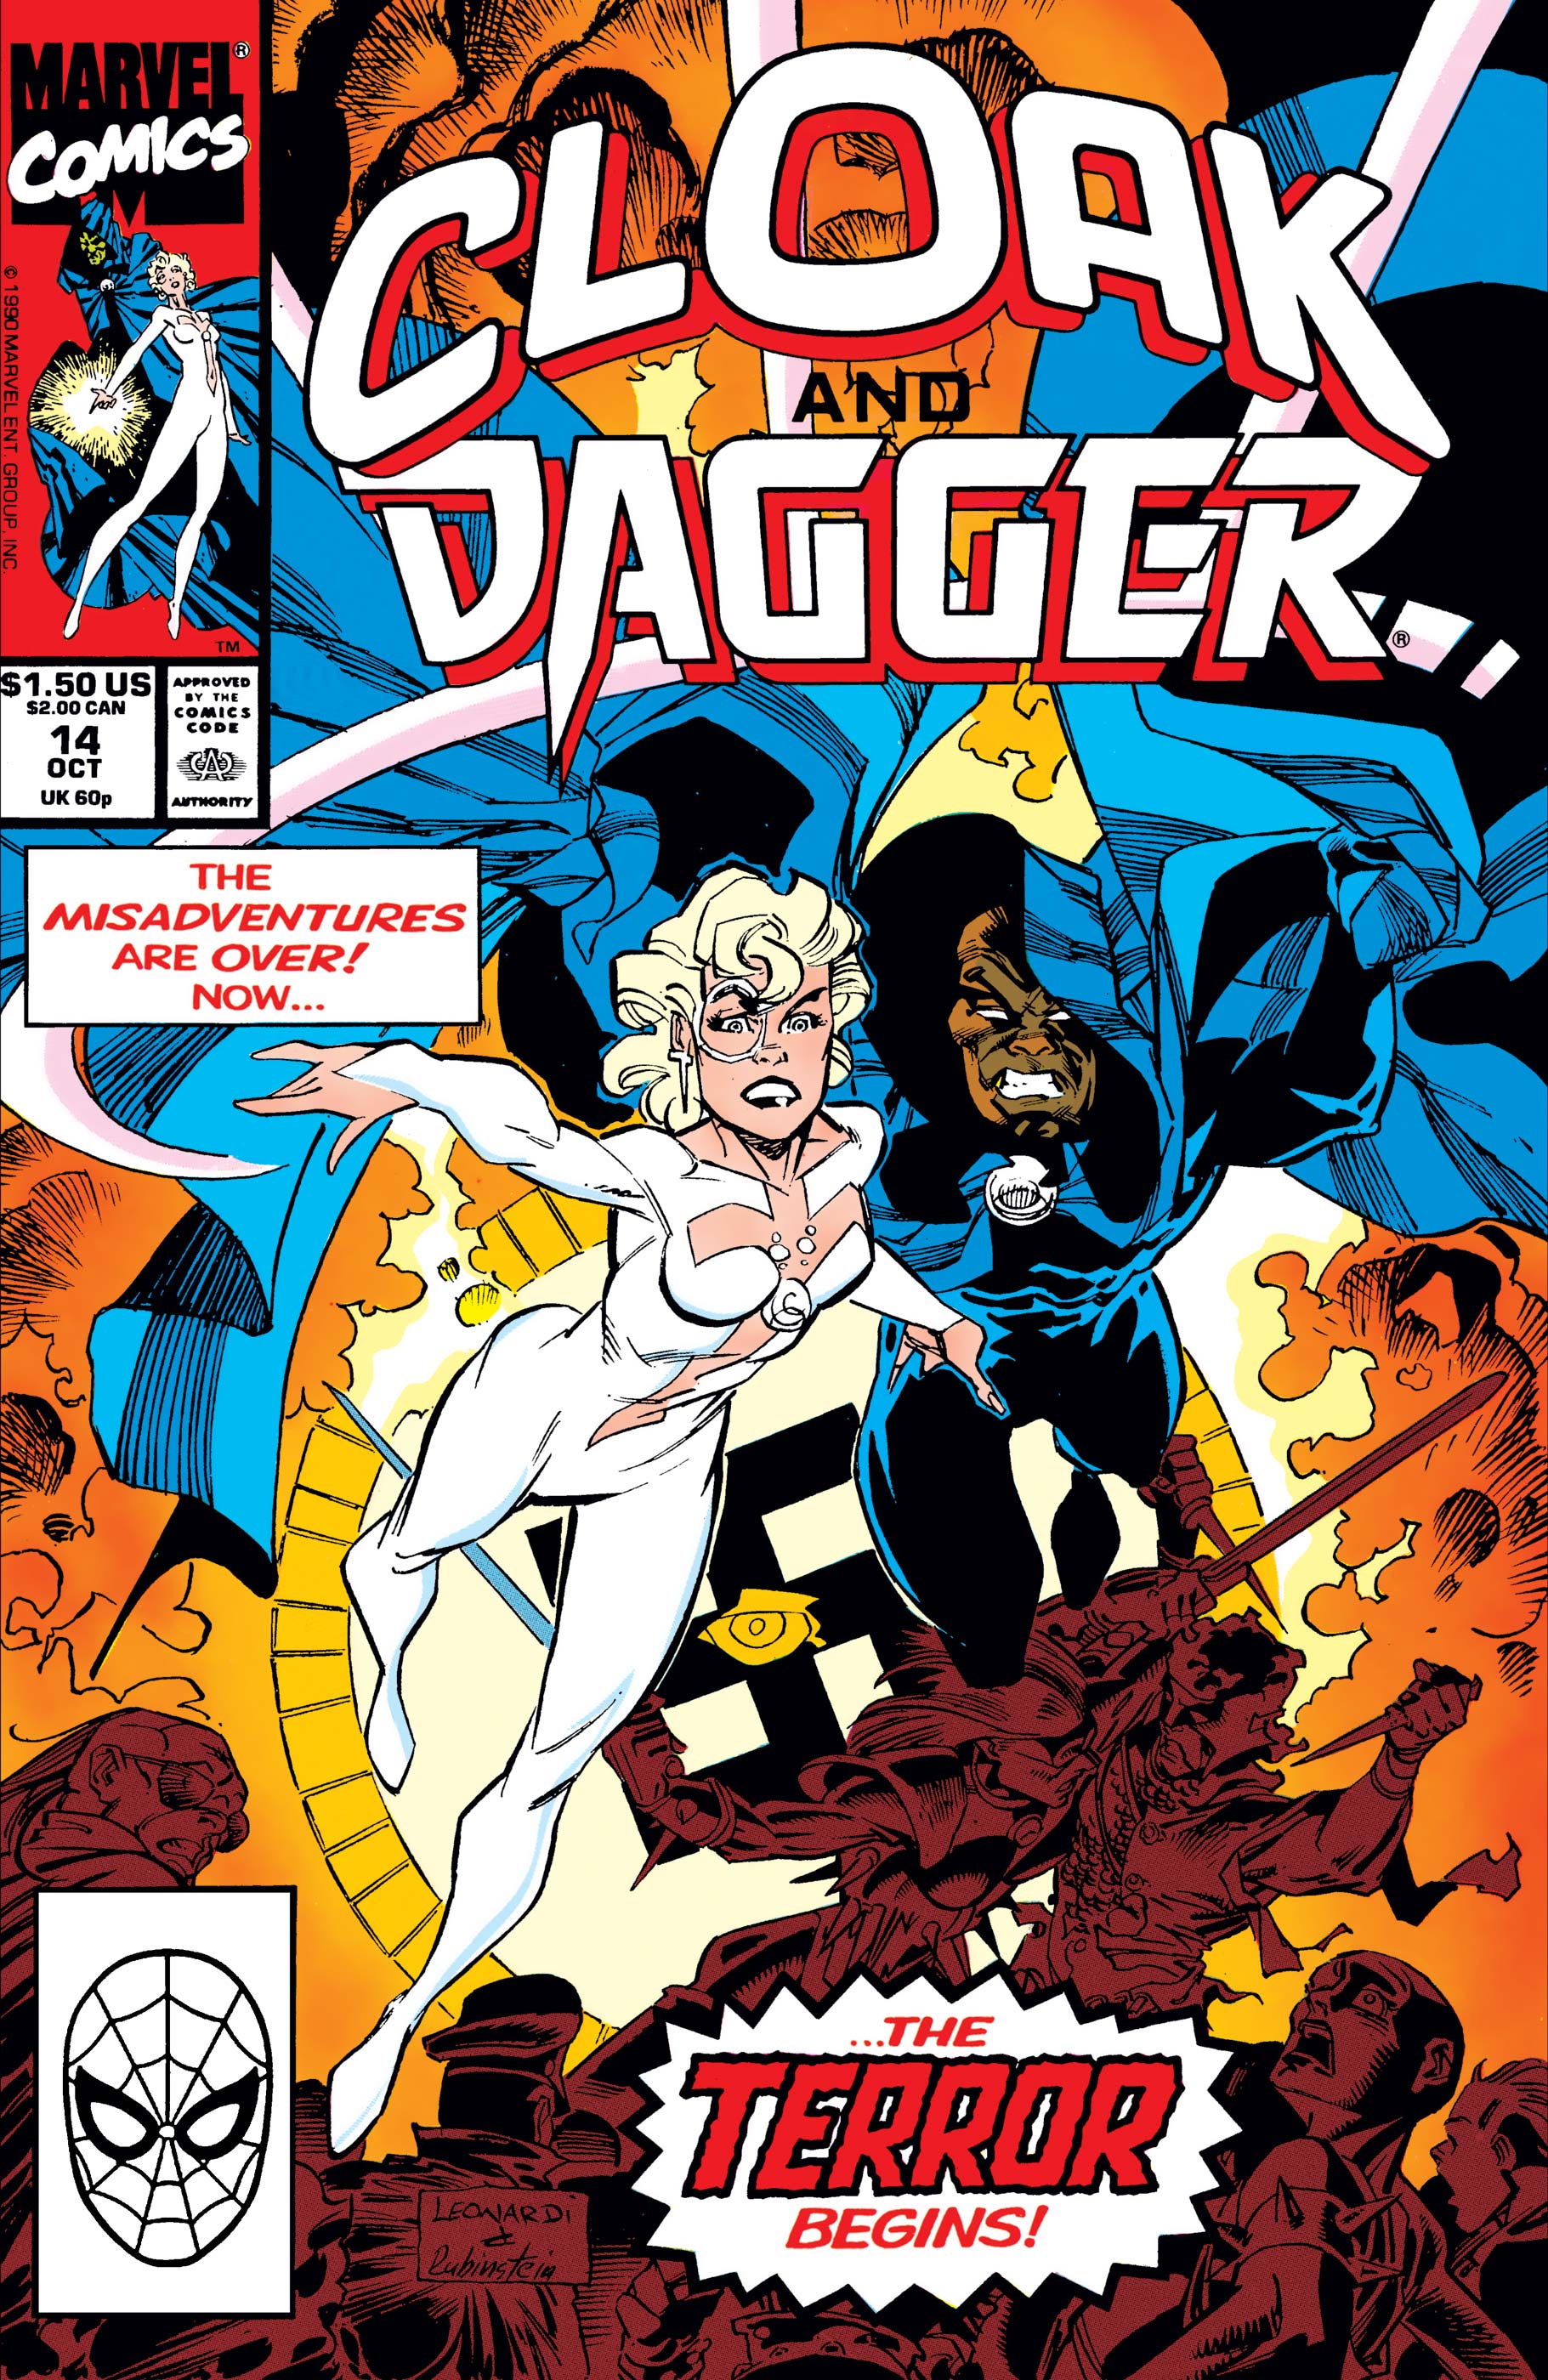 The Mutant Misadventures of Cloak and Dagger (1988) #14